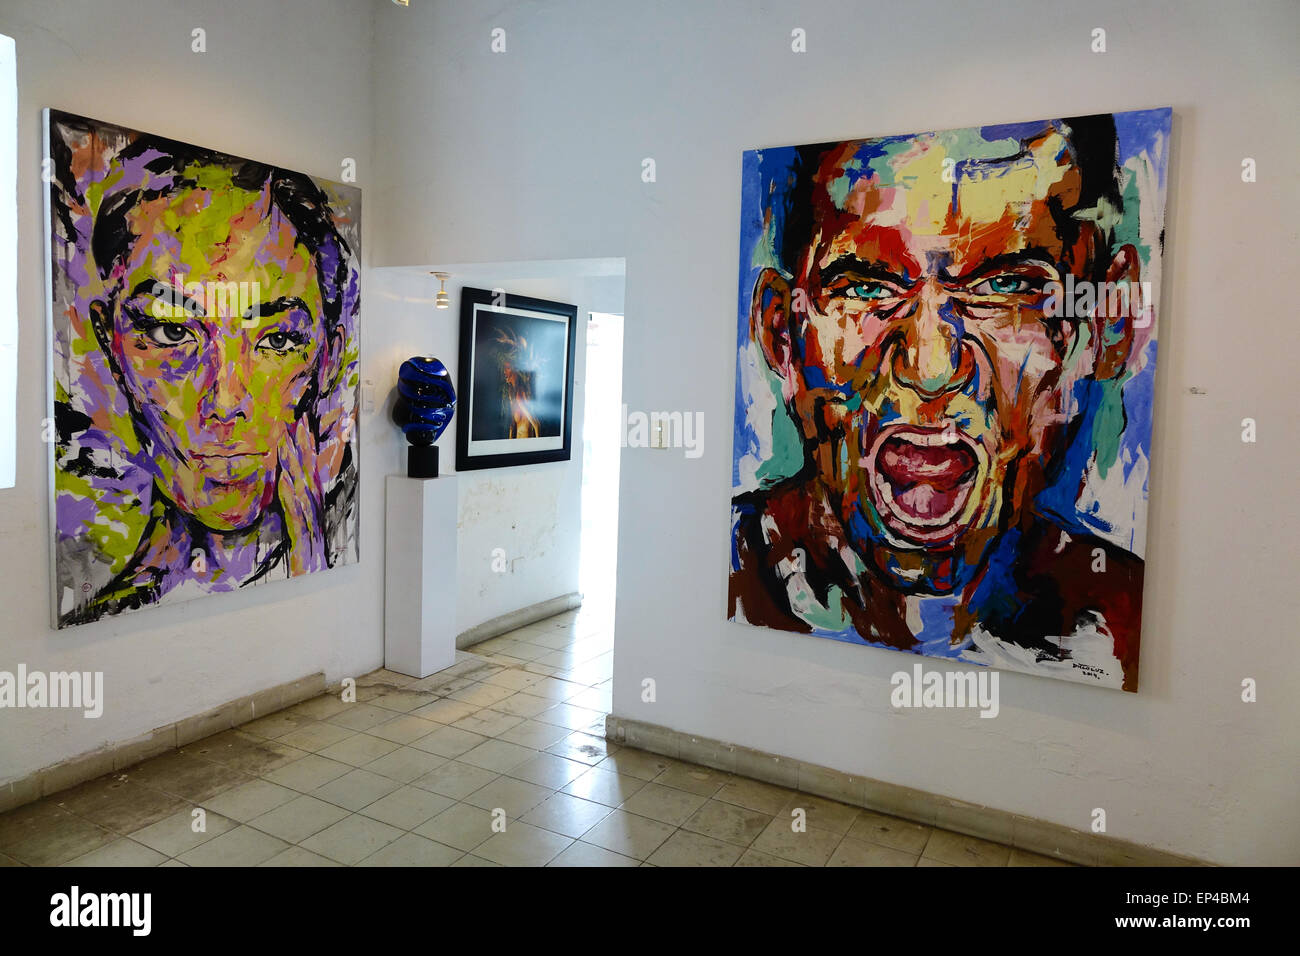 Artworks, including large paintings by Diego Luz, displayed at Galleria Corsica, Puerto Vallarta, Mexico Stock Photo